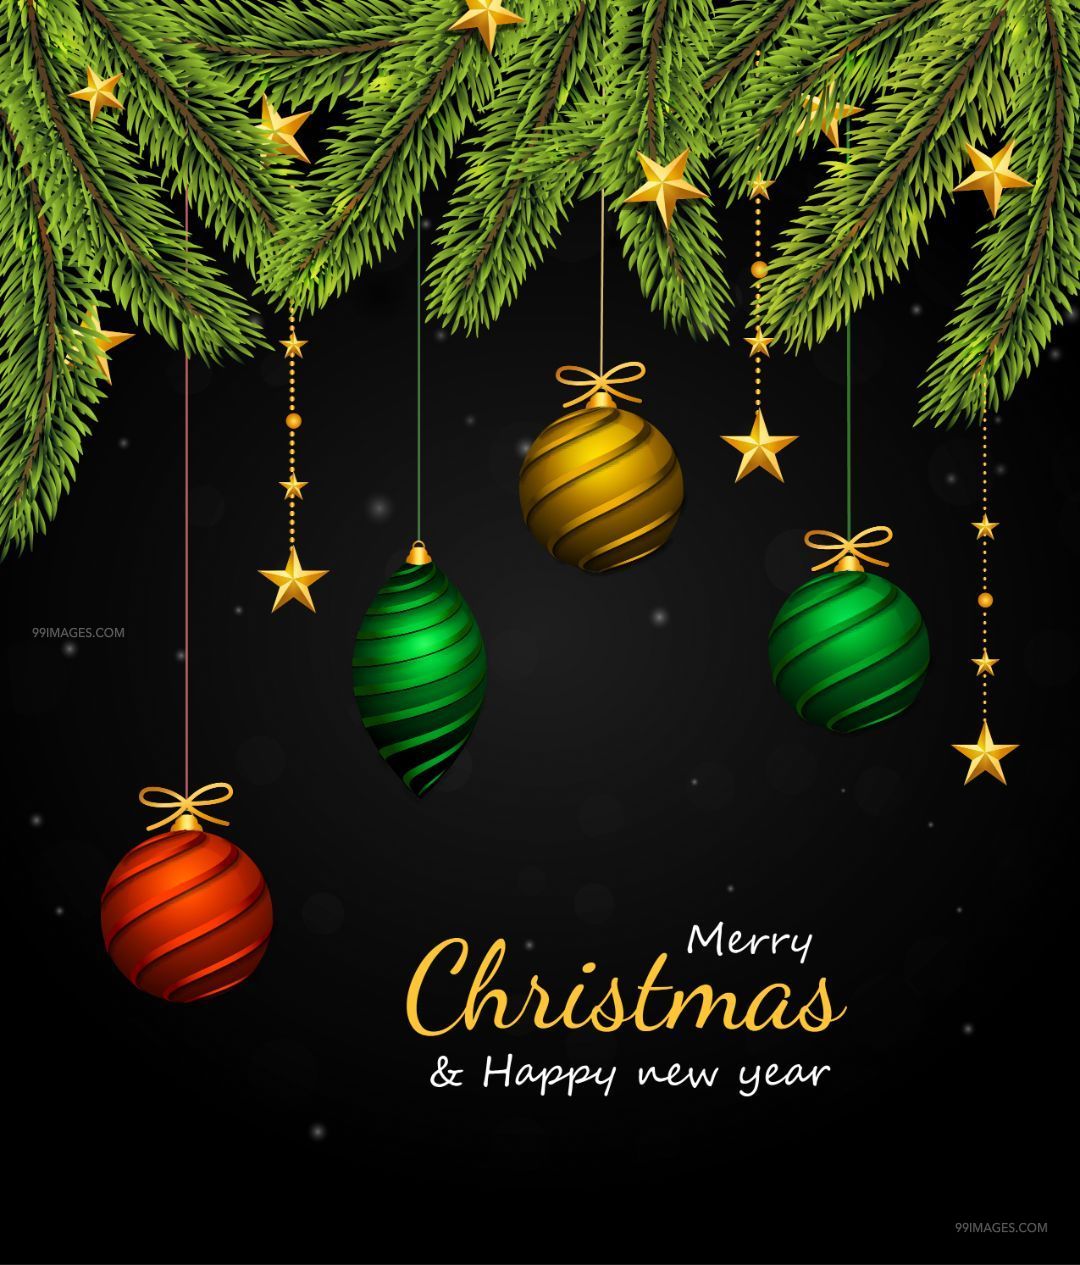 Merry Christmas [25 December 2019] Images, Quotes, - Christmas Ornament - HD Wallpaper 